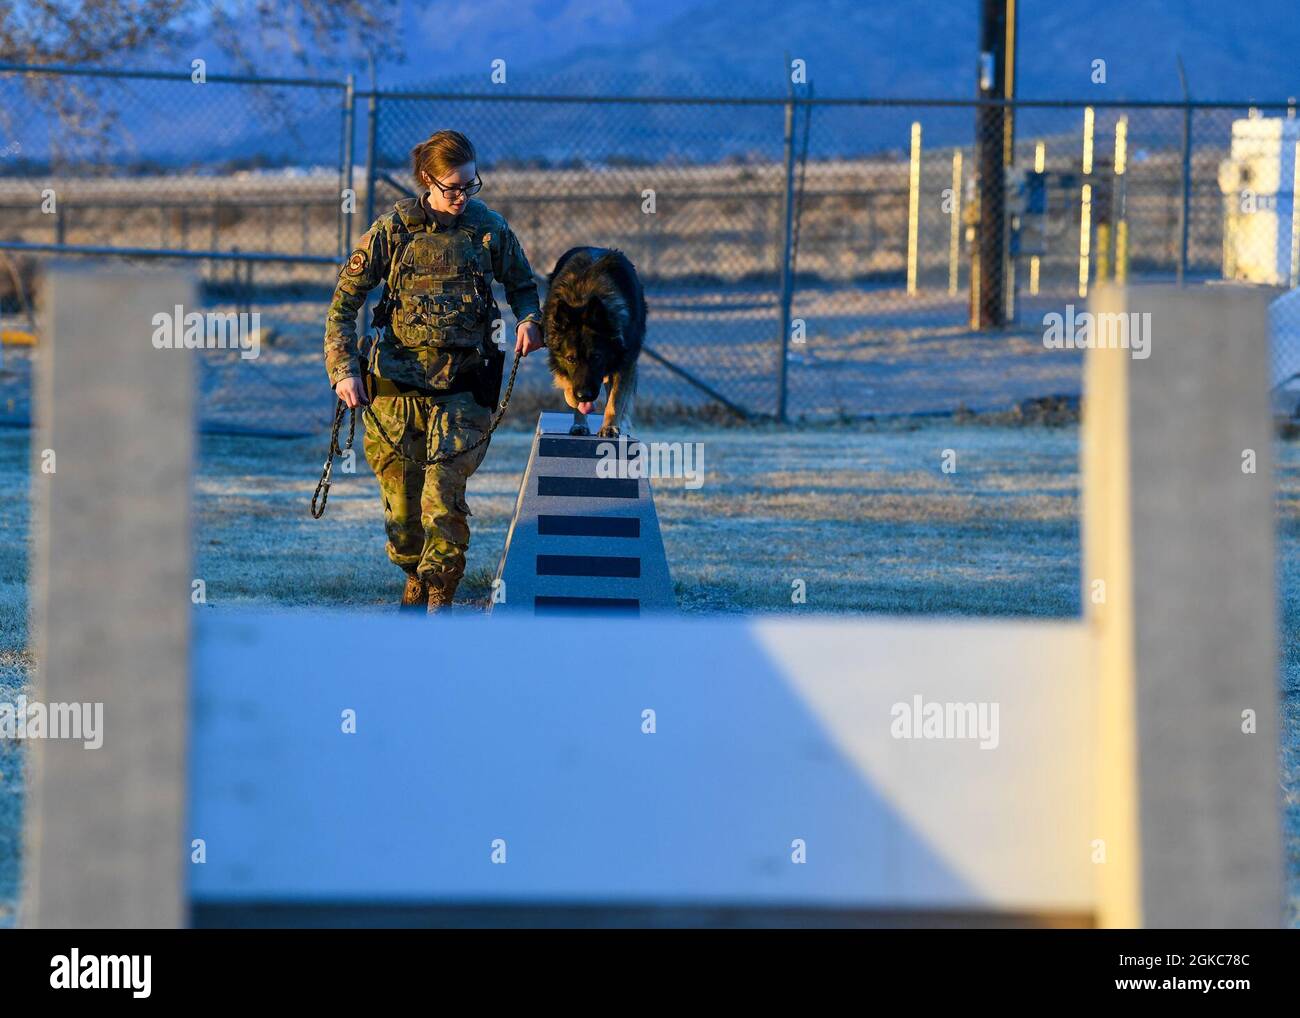 U.S. Air Force Staff Sgt. Tara C. Cummins, 377th Security Forces Squadron military working dog (MWD) handler, trains with MWD Hugo on Kirtland Air Force Base, New Mexico, March 9, 2021. Cummins, MWD Hugo’s handler, trains with him each shift to ensure he is mission ready. Stock Photo